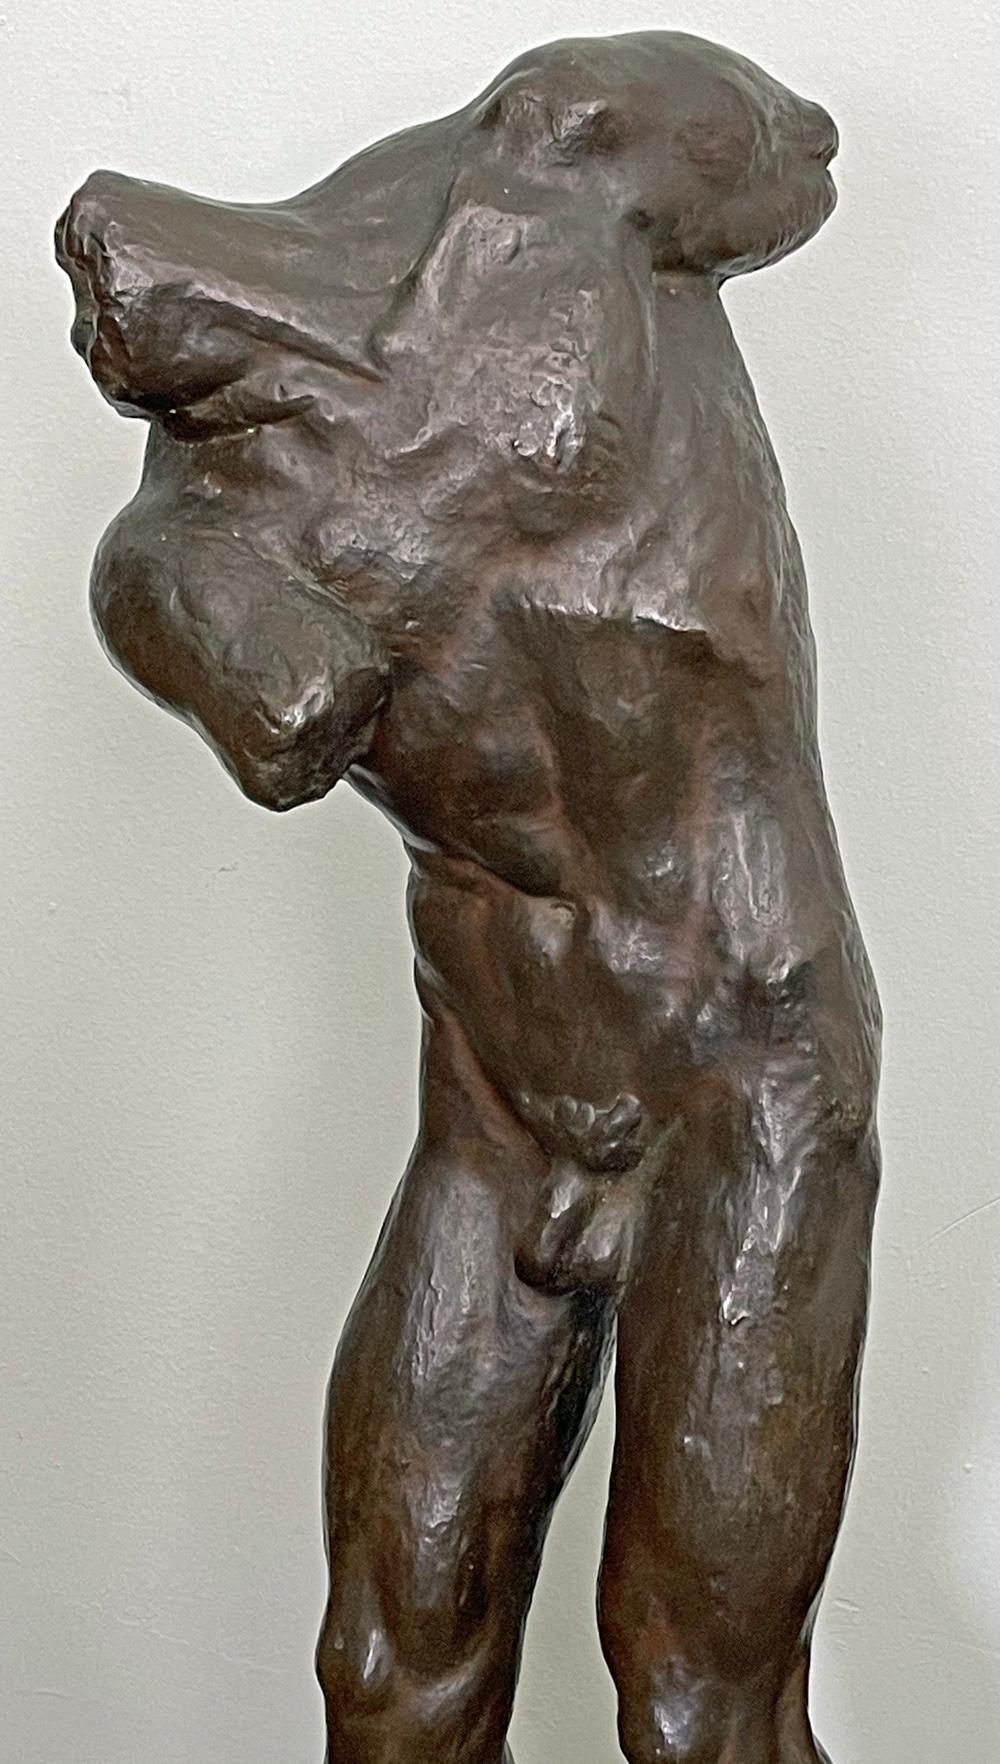 The most remarkable male nude bronze we have ever offered, this masterpiece by Vanja Radauš, a Croation sculptor strongly influenced by Auguste Rodin and Antoine Bourdelle, was created in 1934 when the artist was in his late twenties. Entitled 